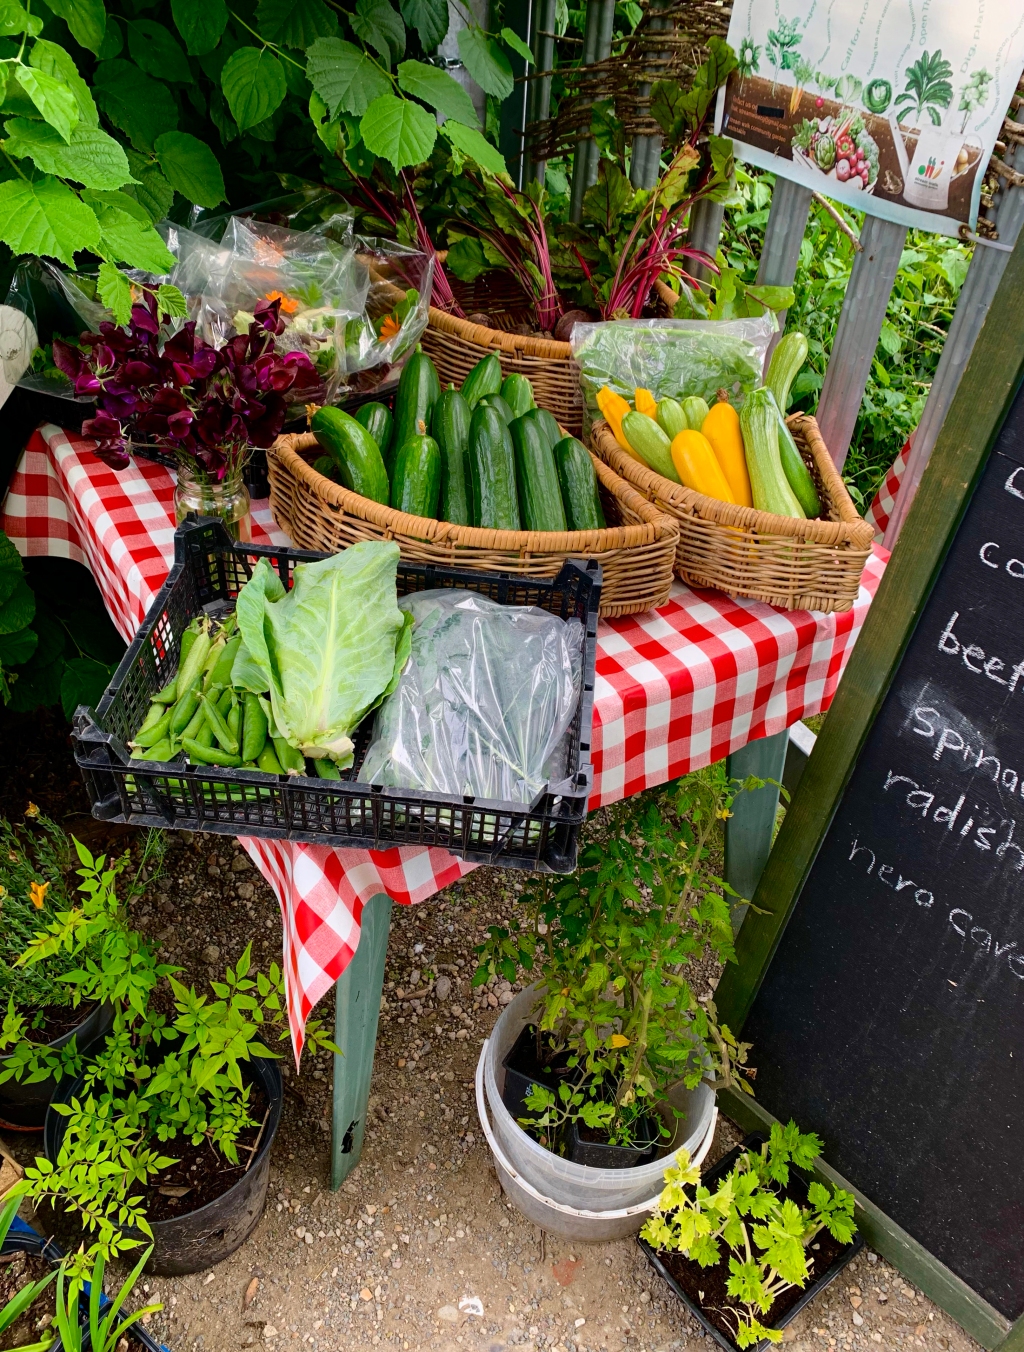 Plant & produce stall